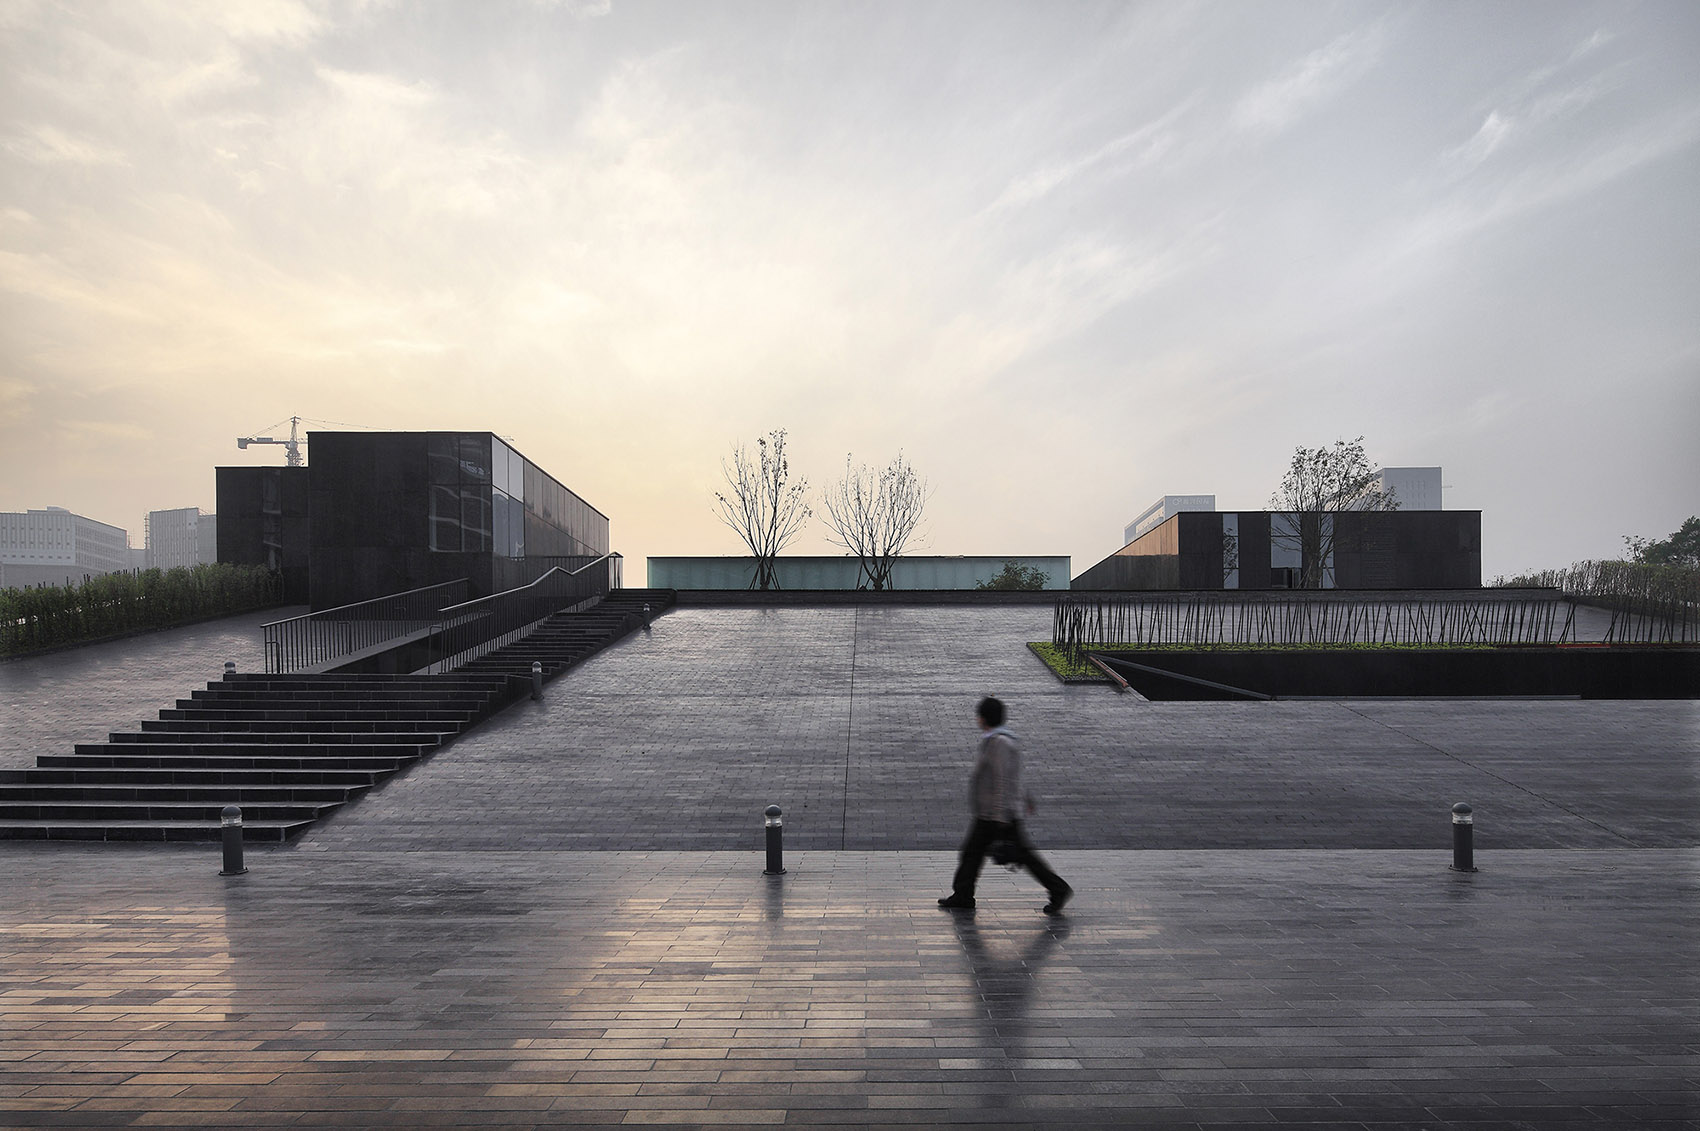 009-museum-of-contemporary-arts-china-by-jiakun-architects.jpg